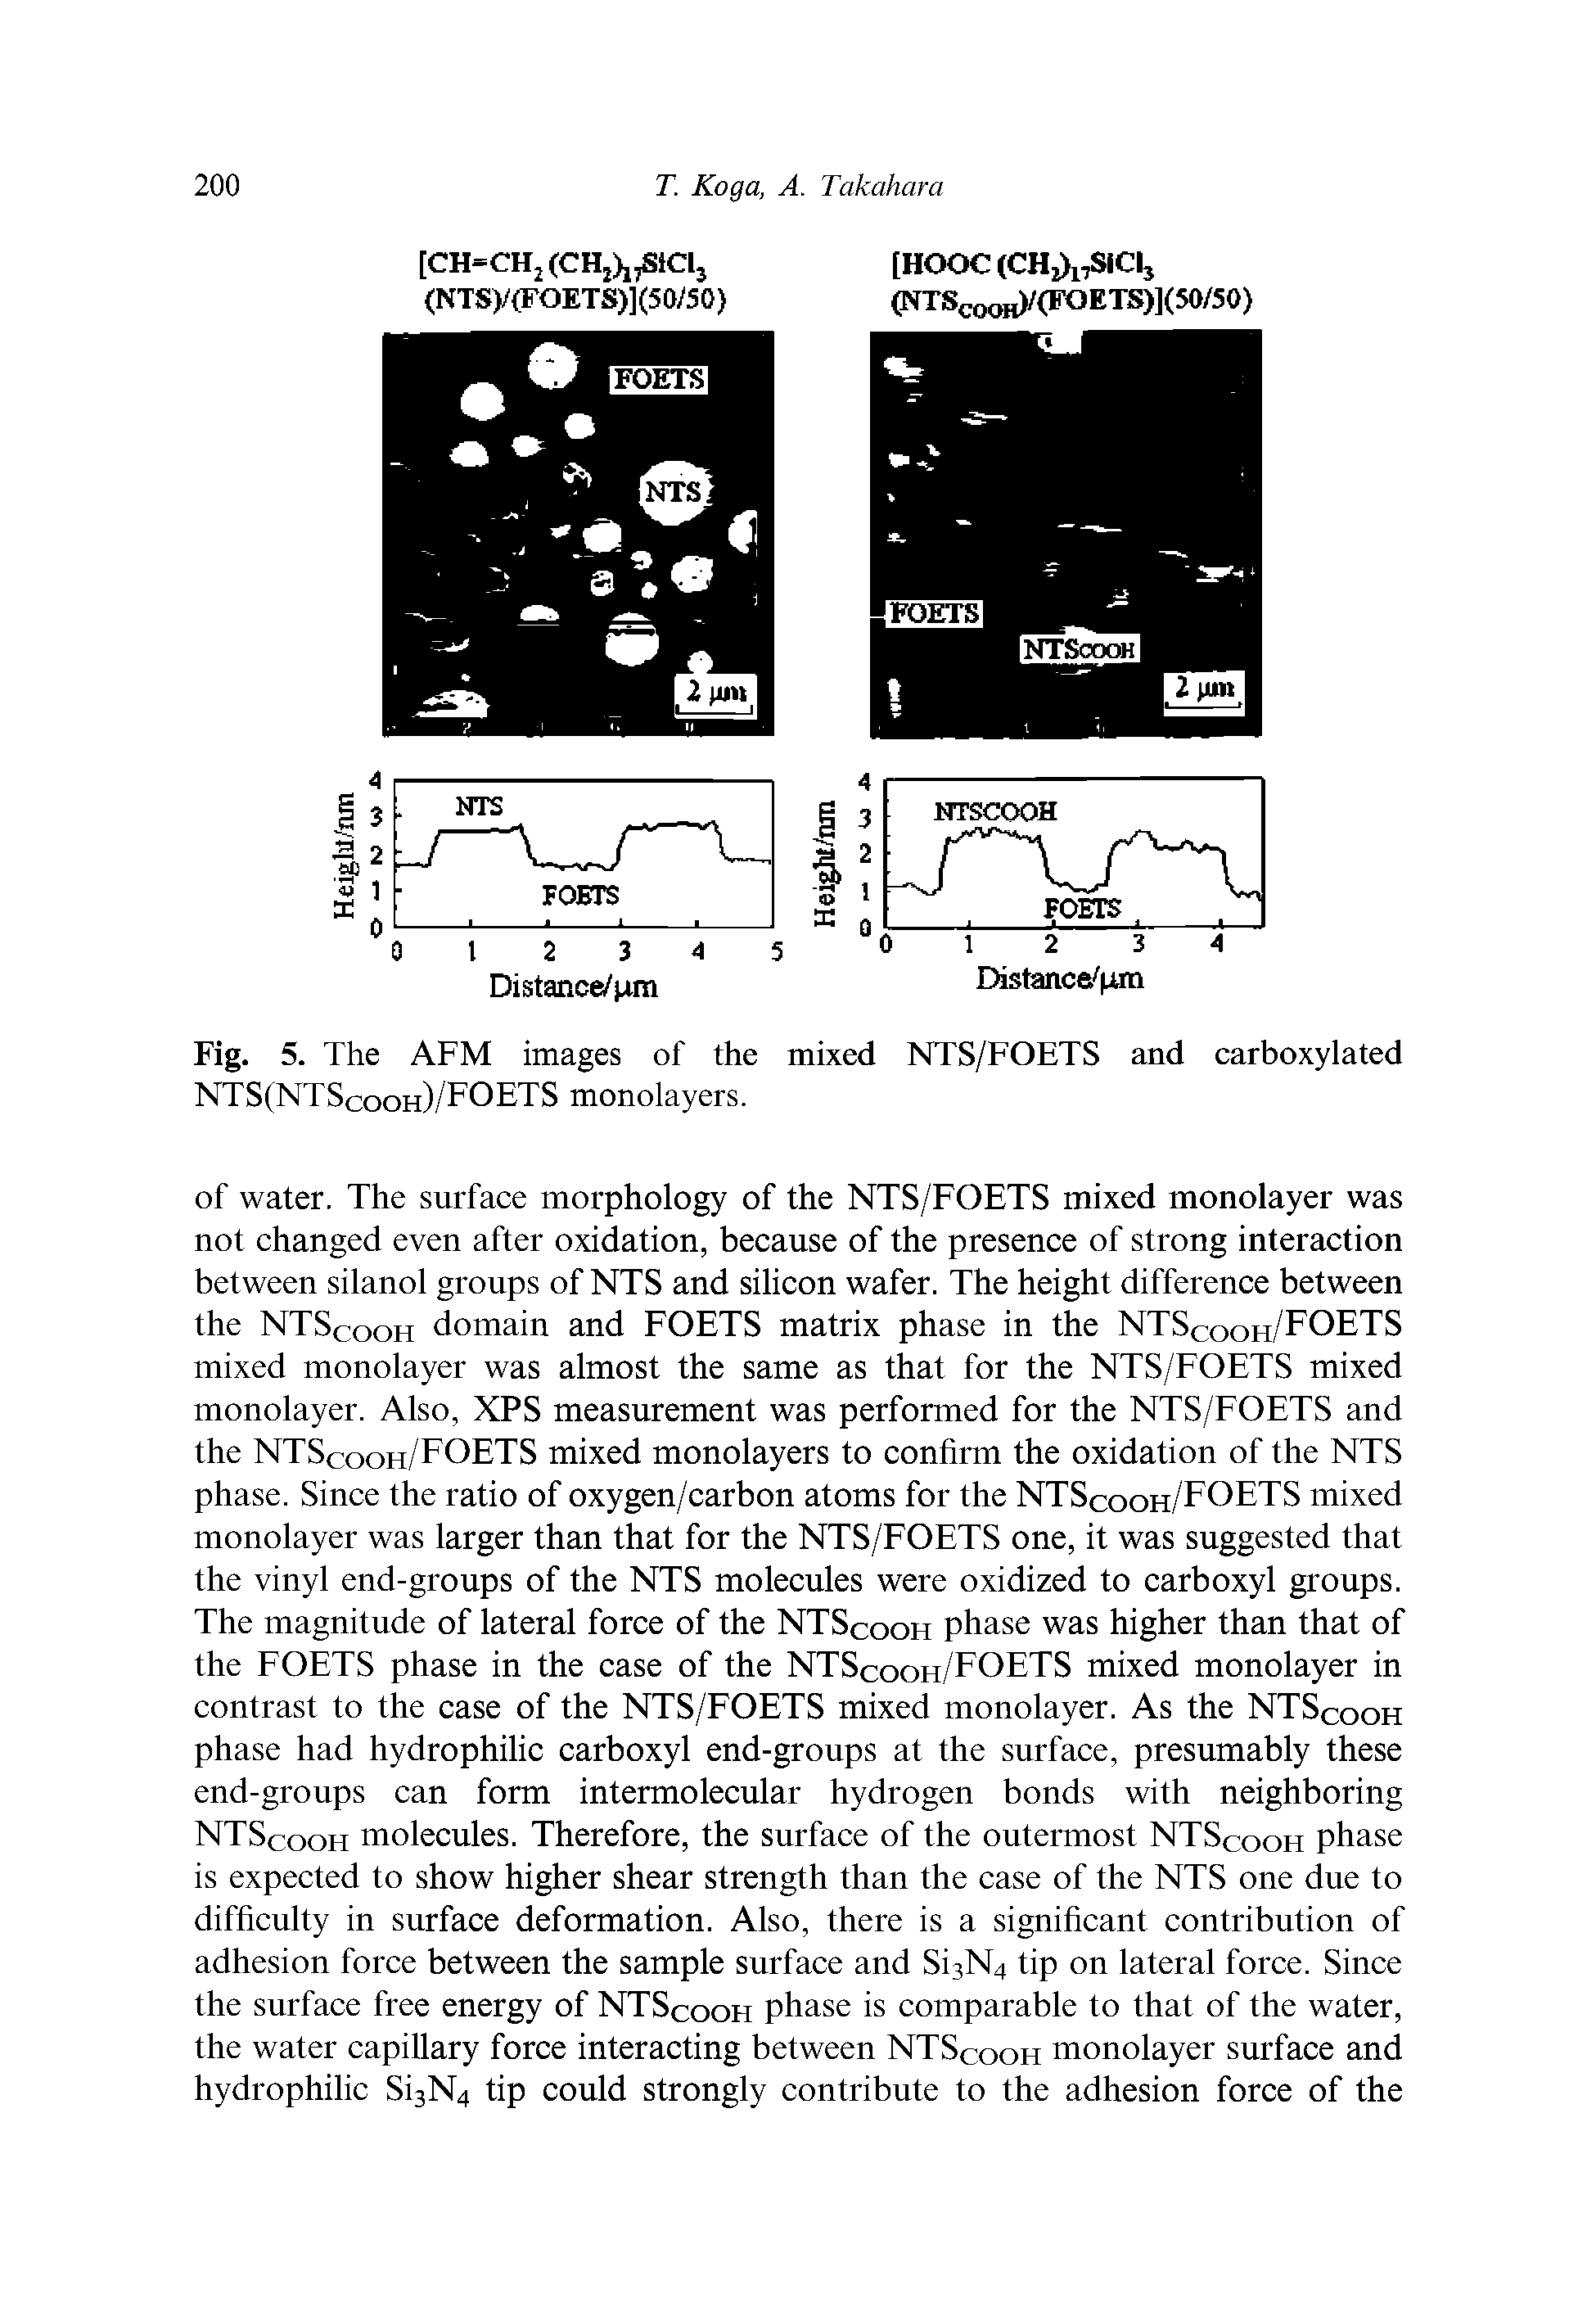 Fig. 5. The AFM images of the mixed NTS/FOETS and carboxylated NTS(NTScooh)/FOETS monolayers.